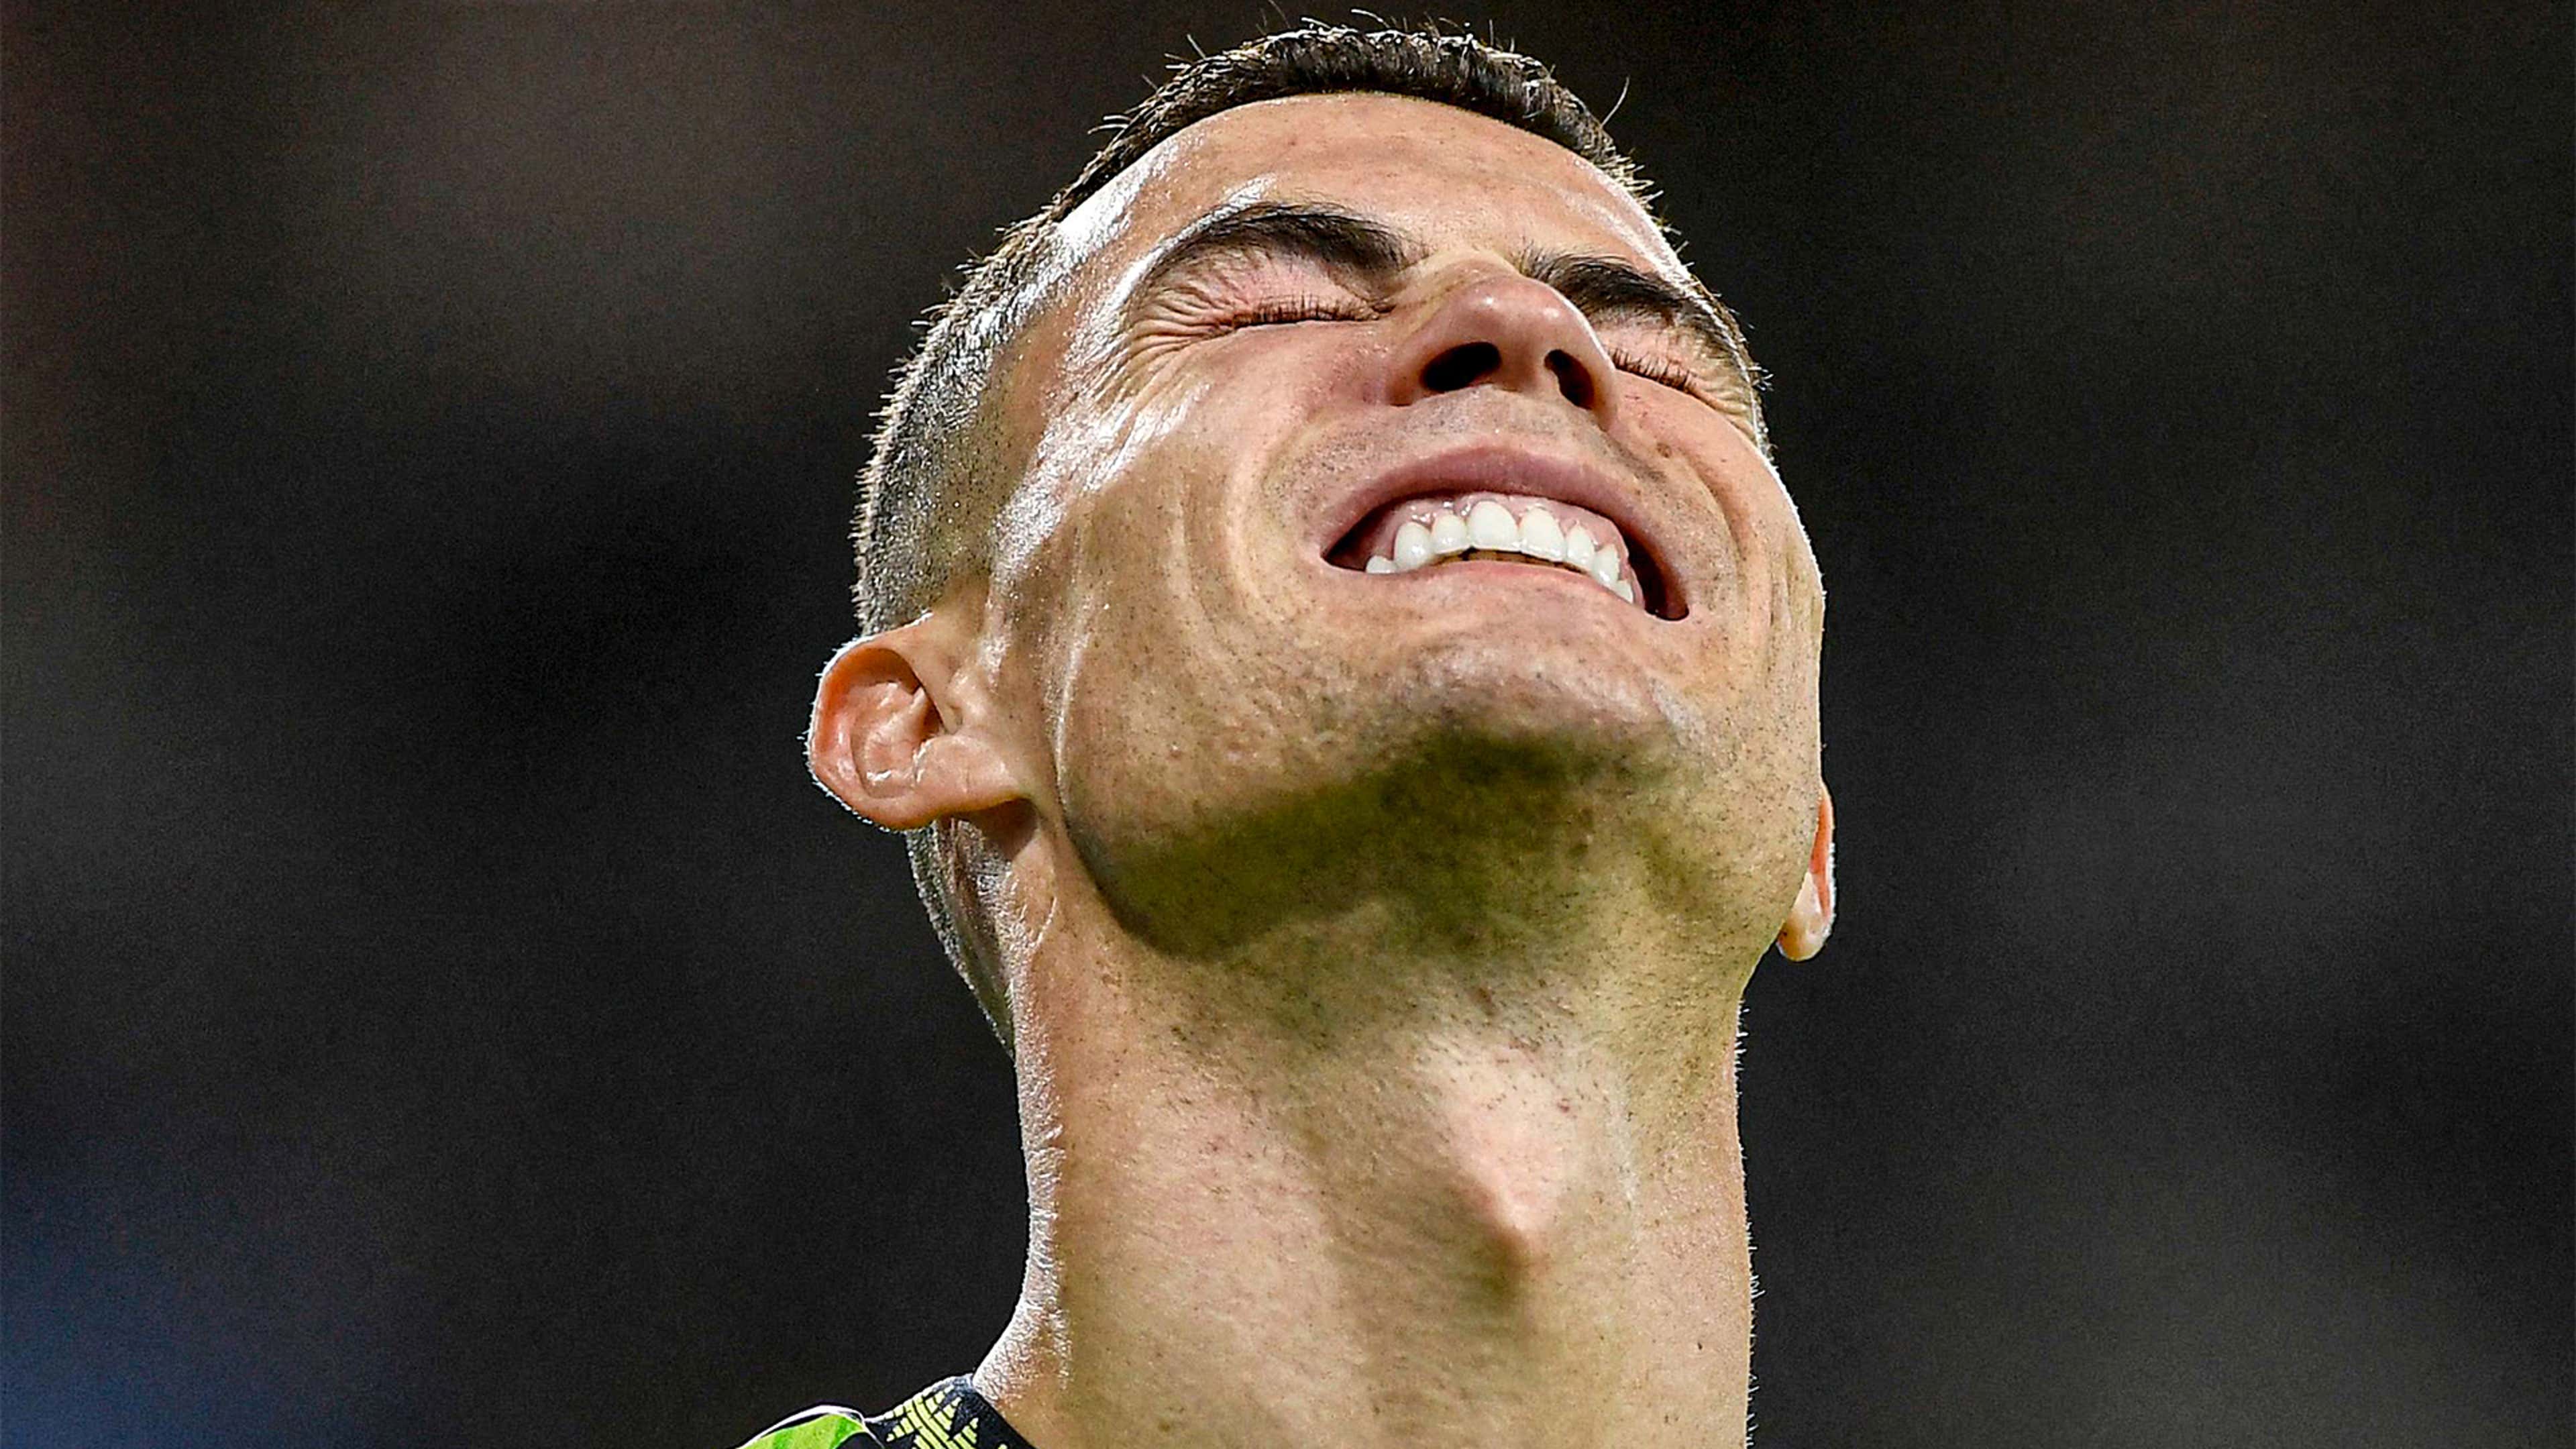 Cristiano Ronaldo goes viral after meeting with IShowSpeed